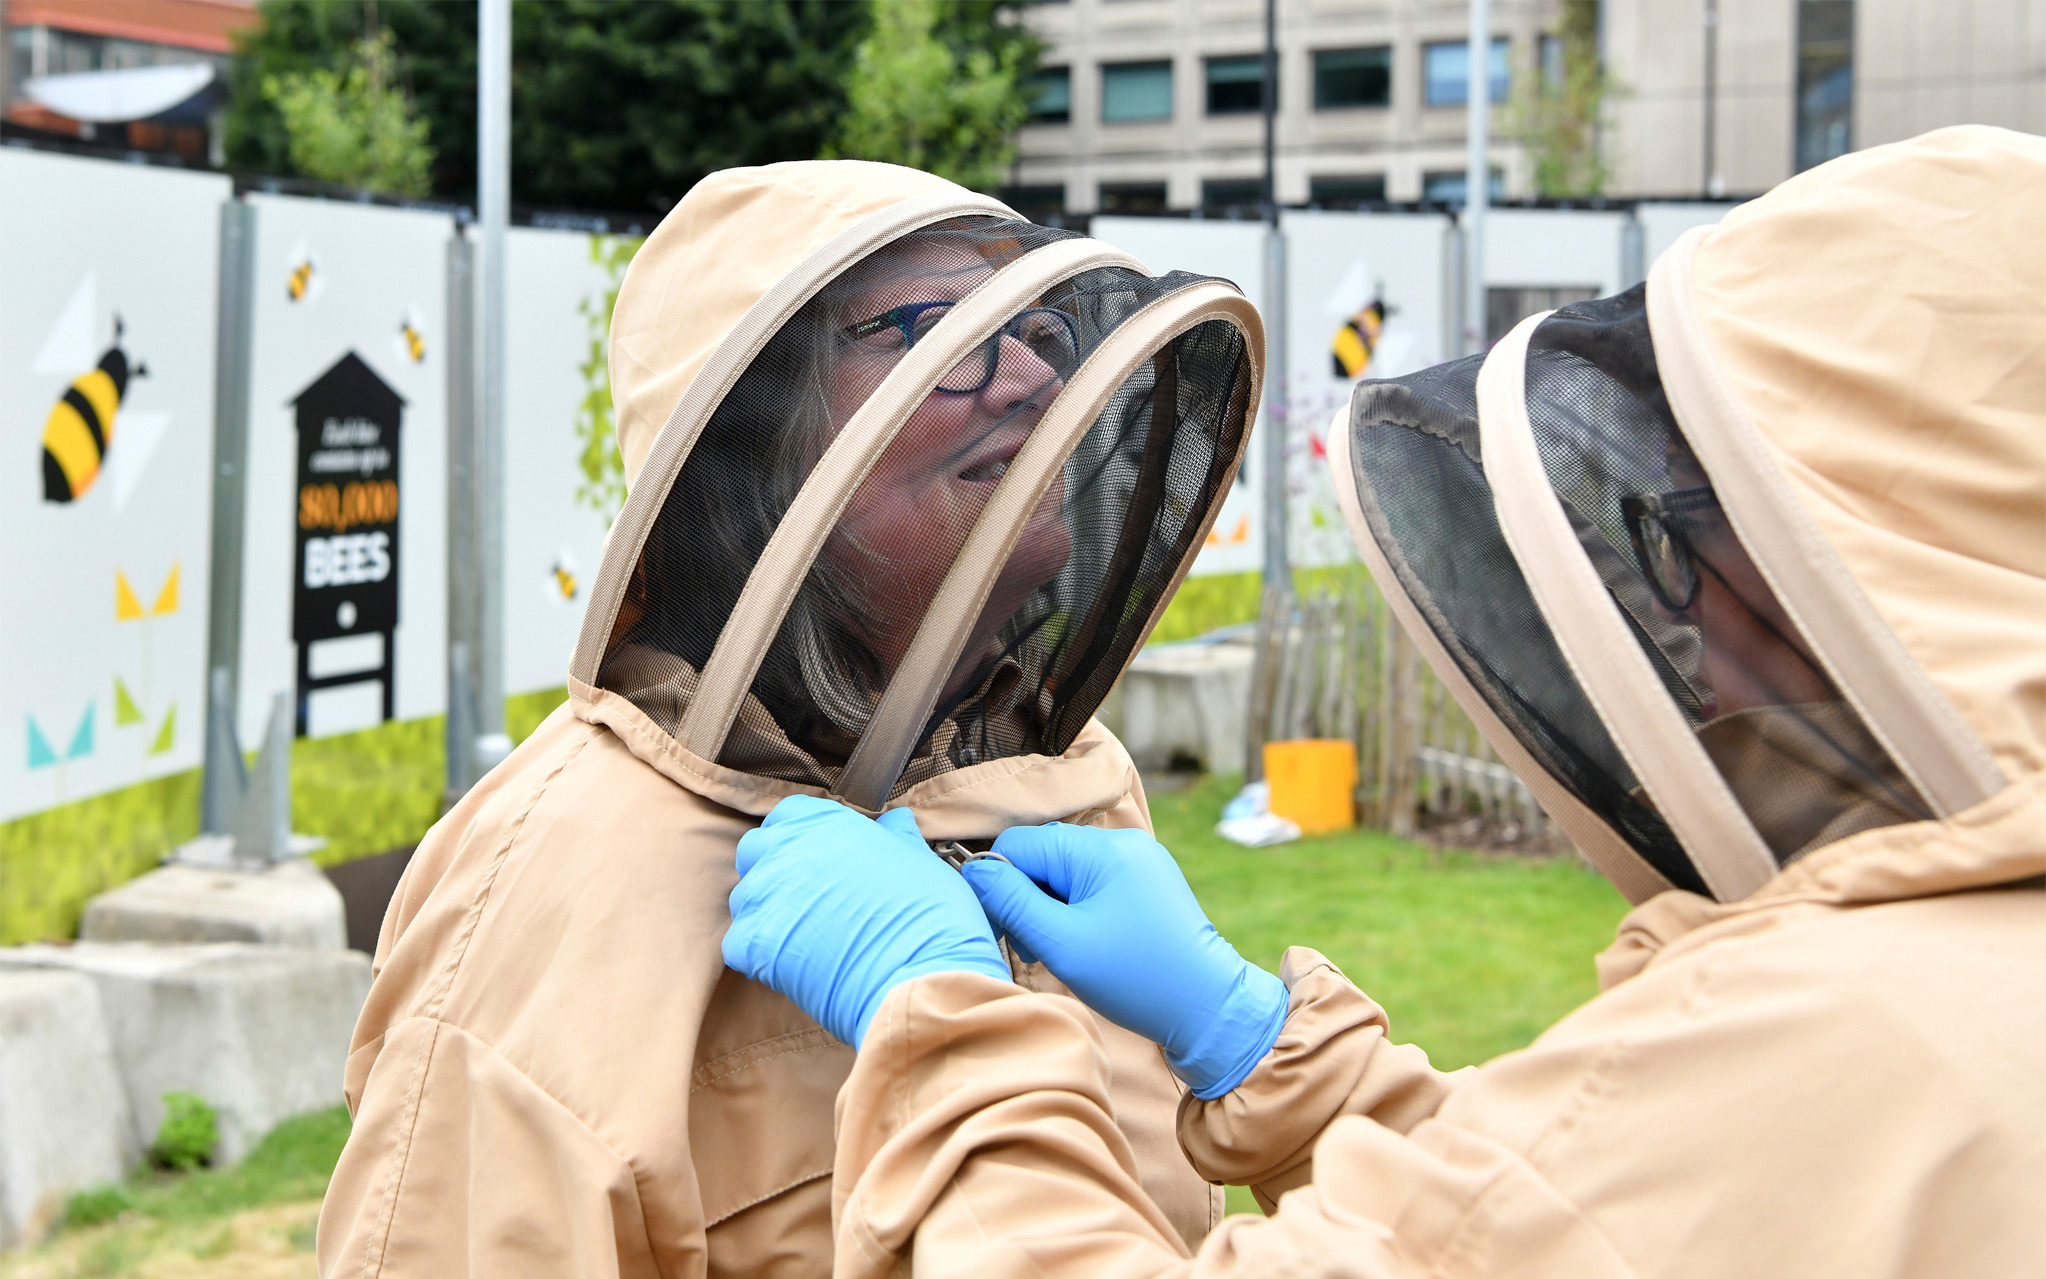 Someone suiting up in a beekeeping suit and checking their helmet.